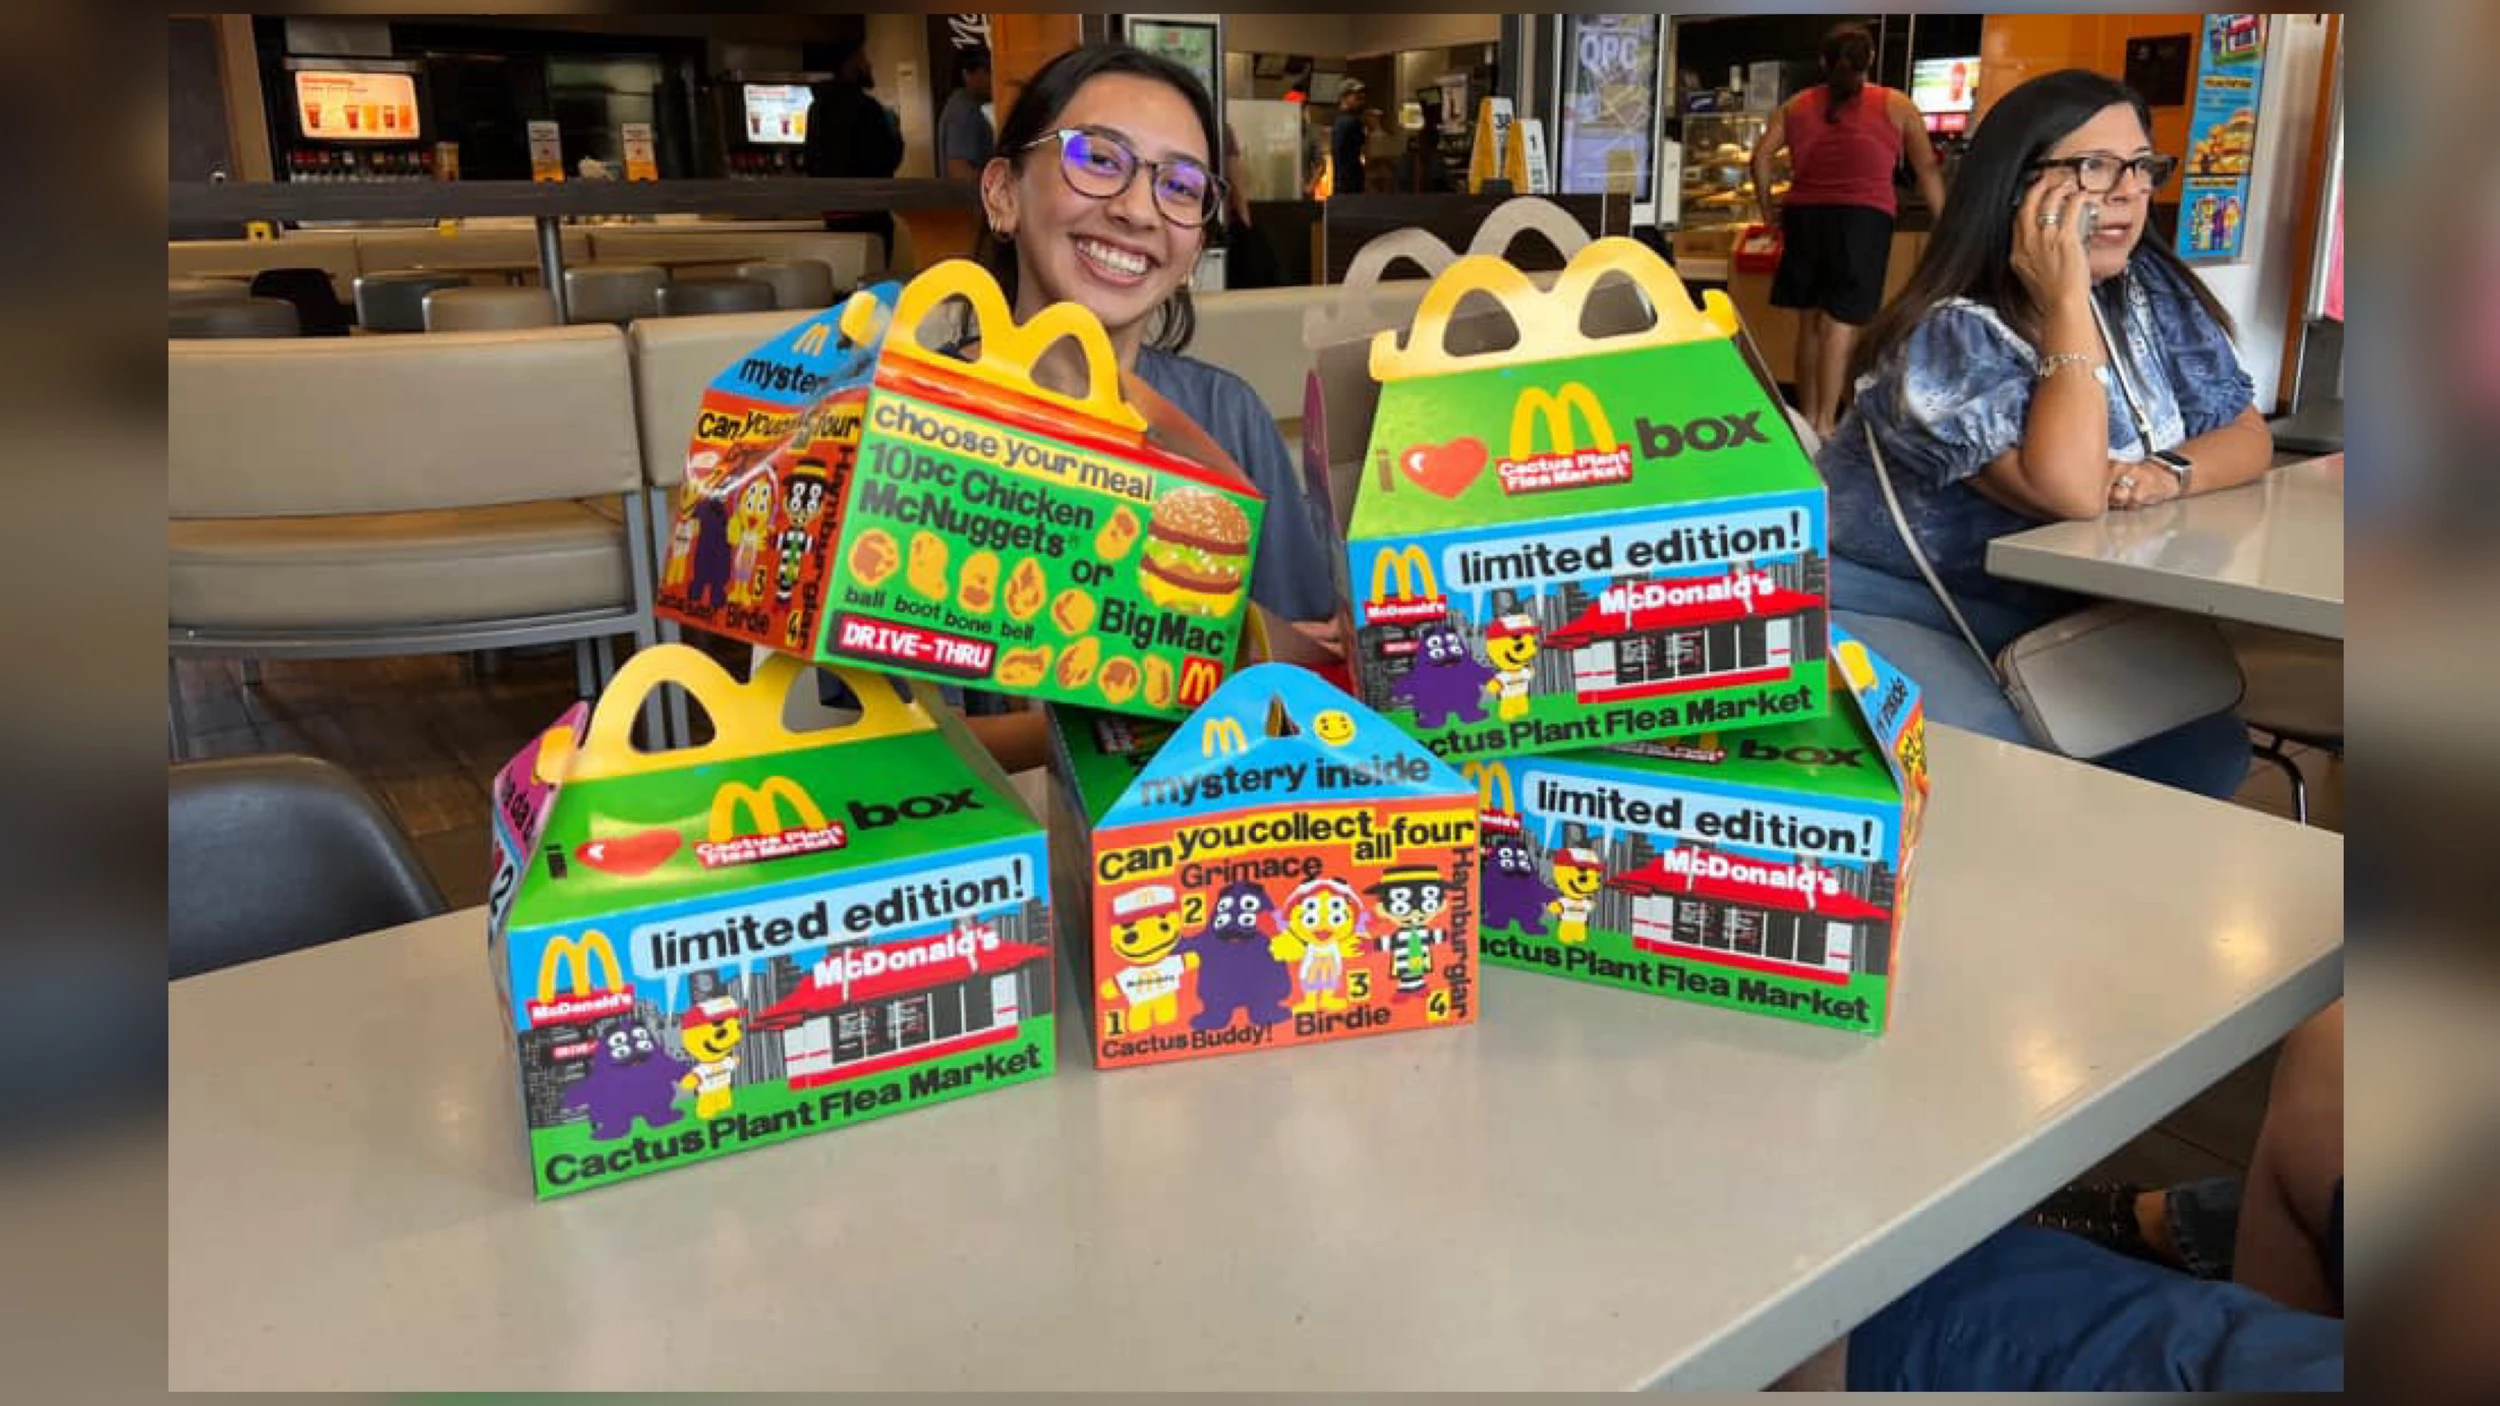 The Adult Happy Meals From McDonald's Have Already Sold Out—And